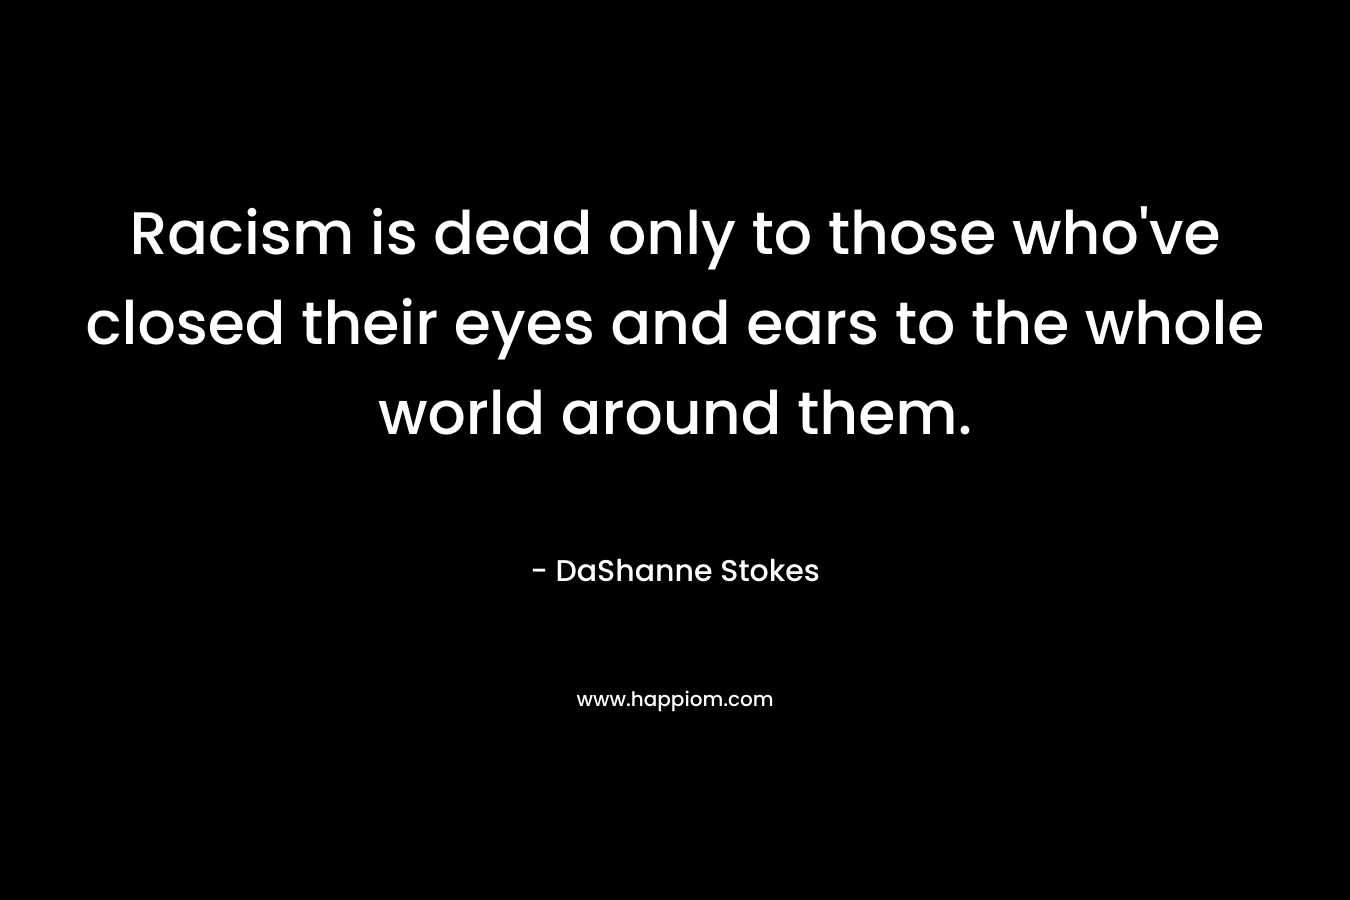 Racism is dead only to those who've closed their eyes and ears to the whole world around them.